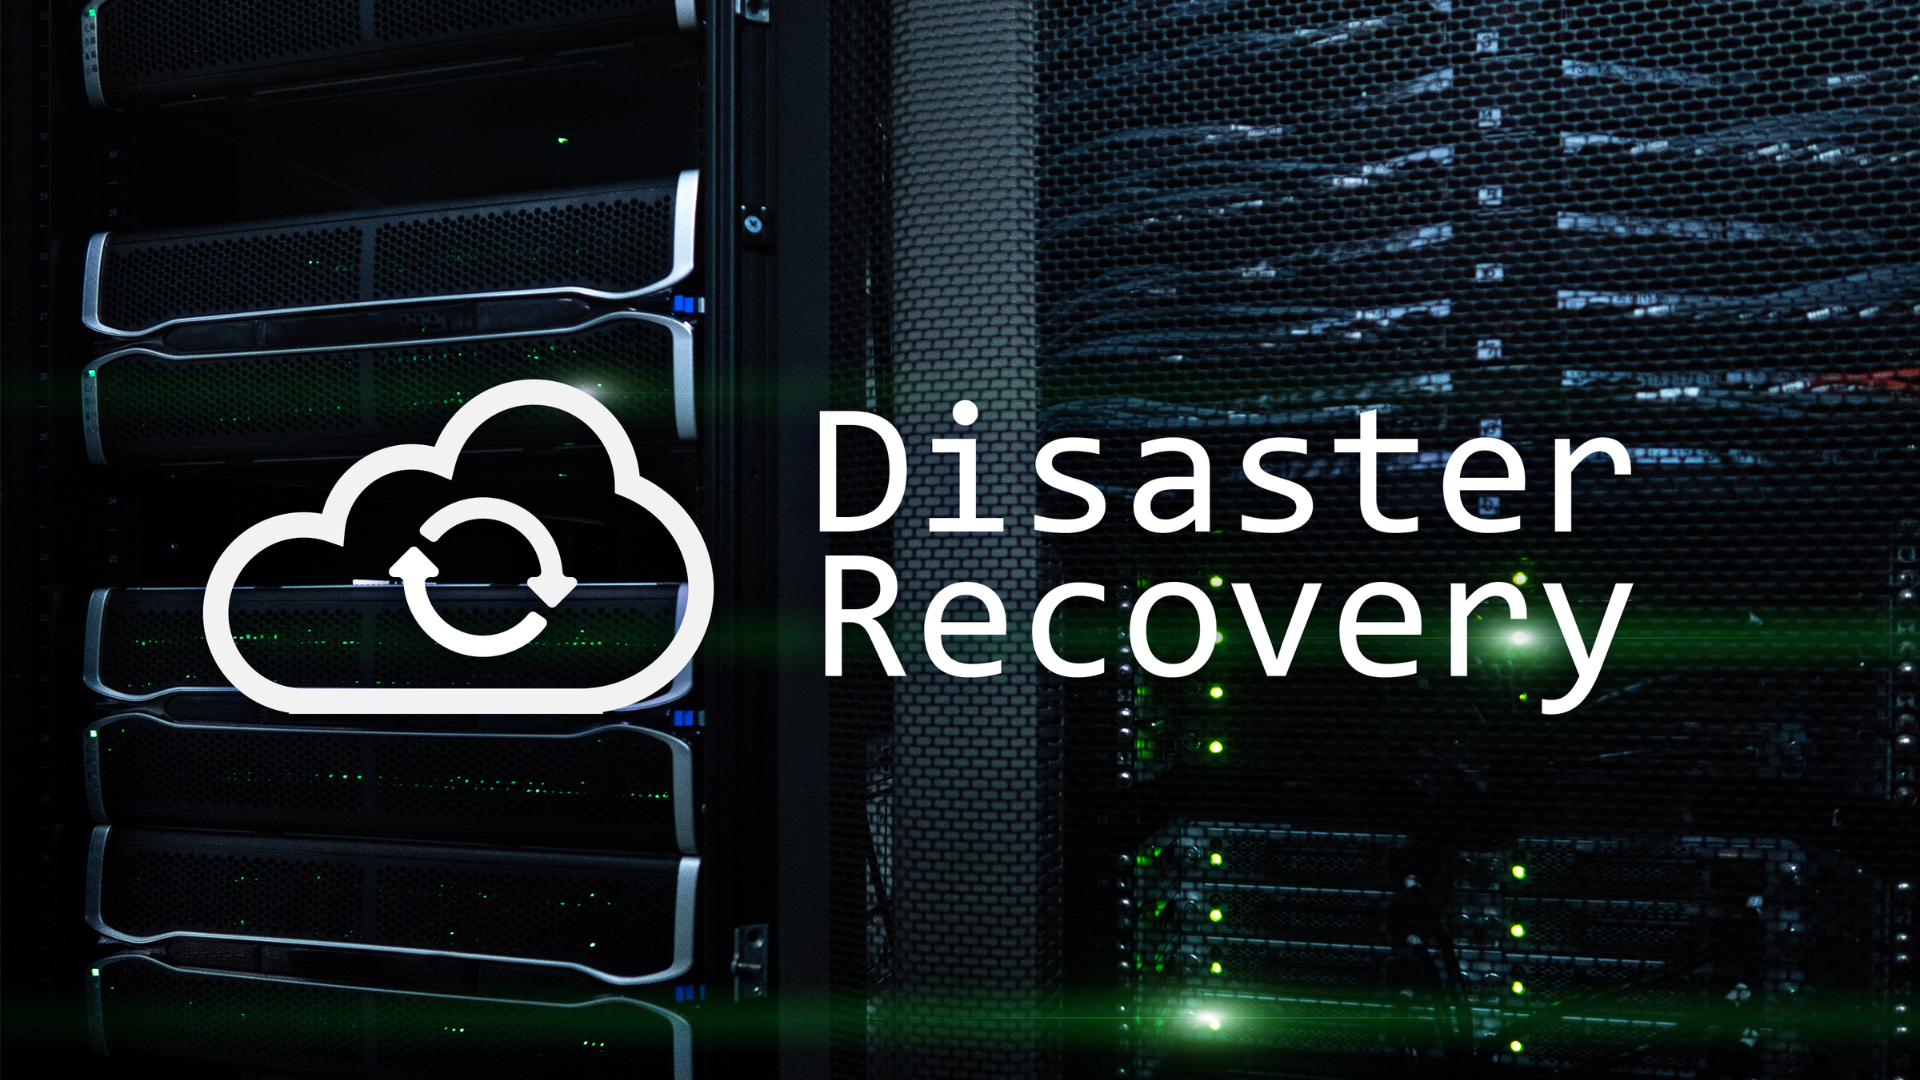 Disaster Recovery image